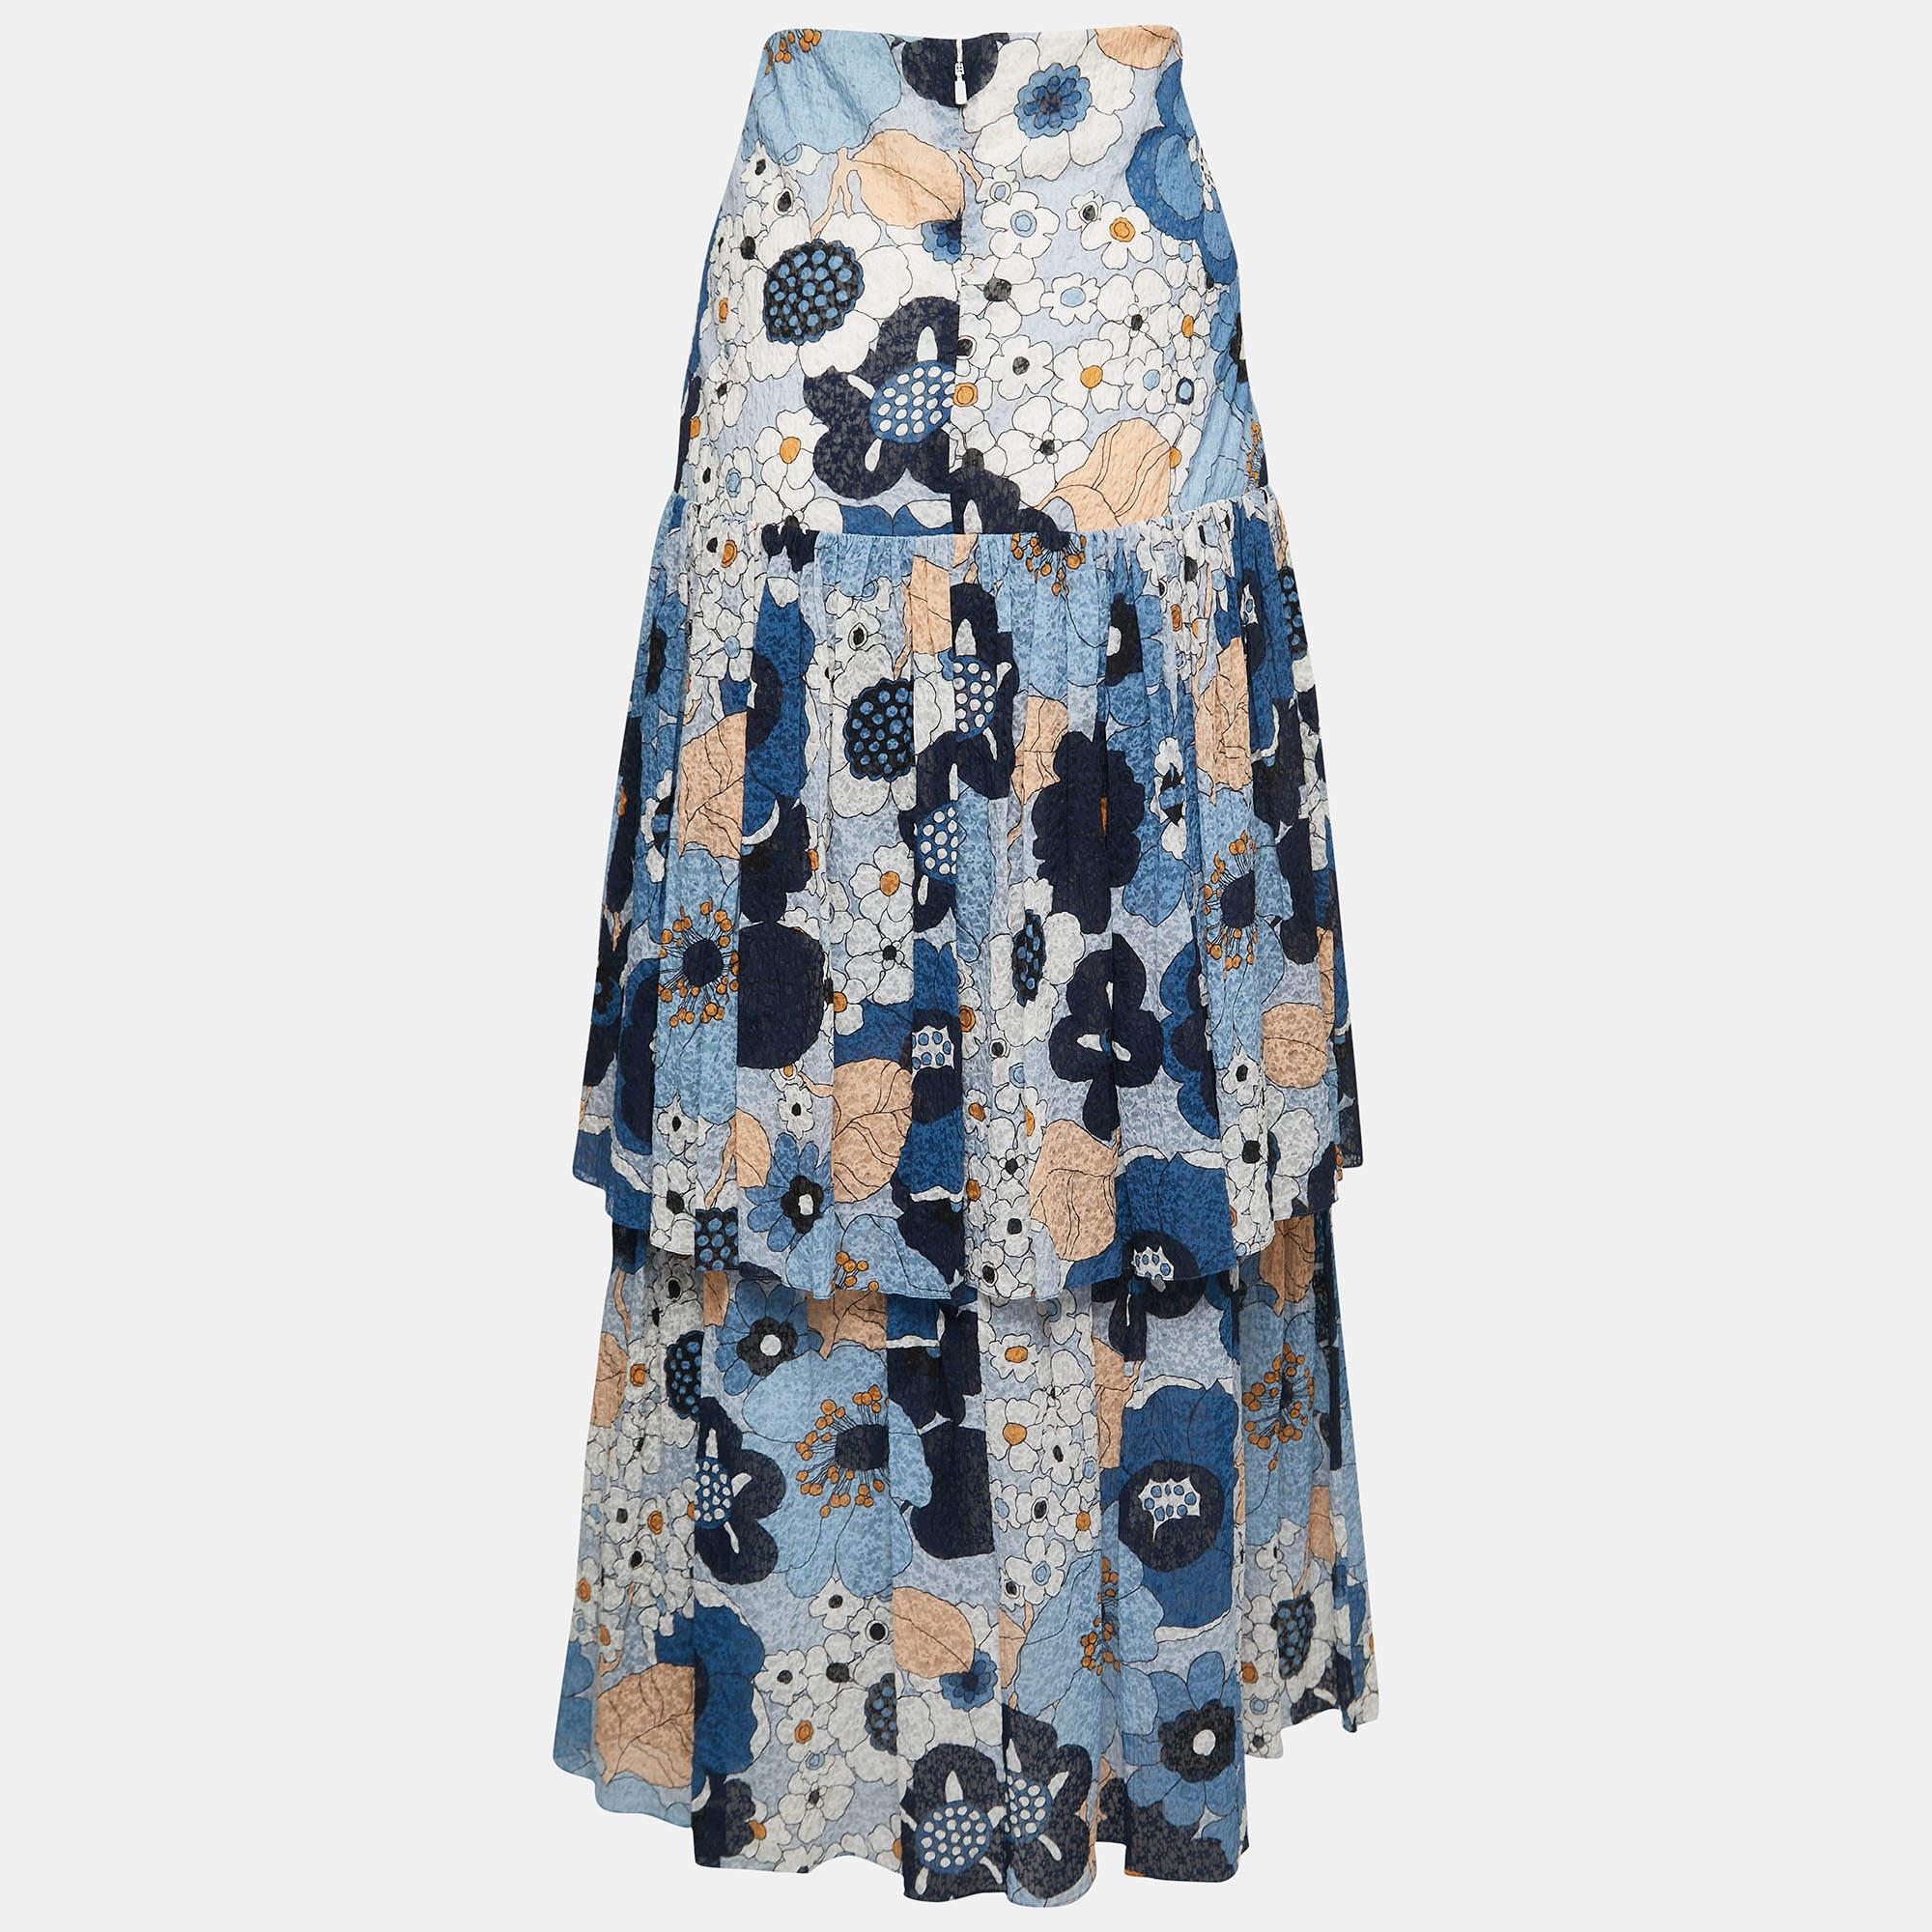 The Chloe skirt is a stunning piece that exudes feminine charm. With its vibrant blue color, delicate floral print, and textured cotton fabric, this skirt offers a stylish and comfortable option for any occasion. The tiered design adds movement and